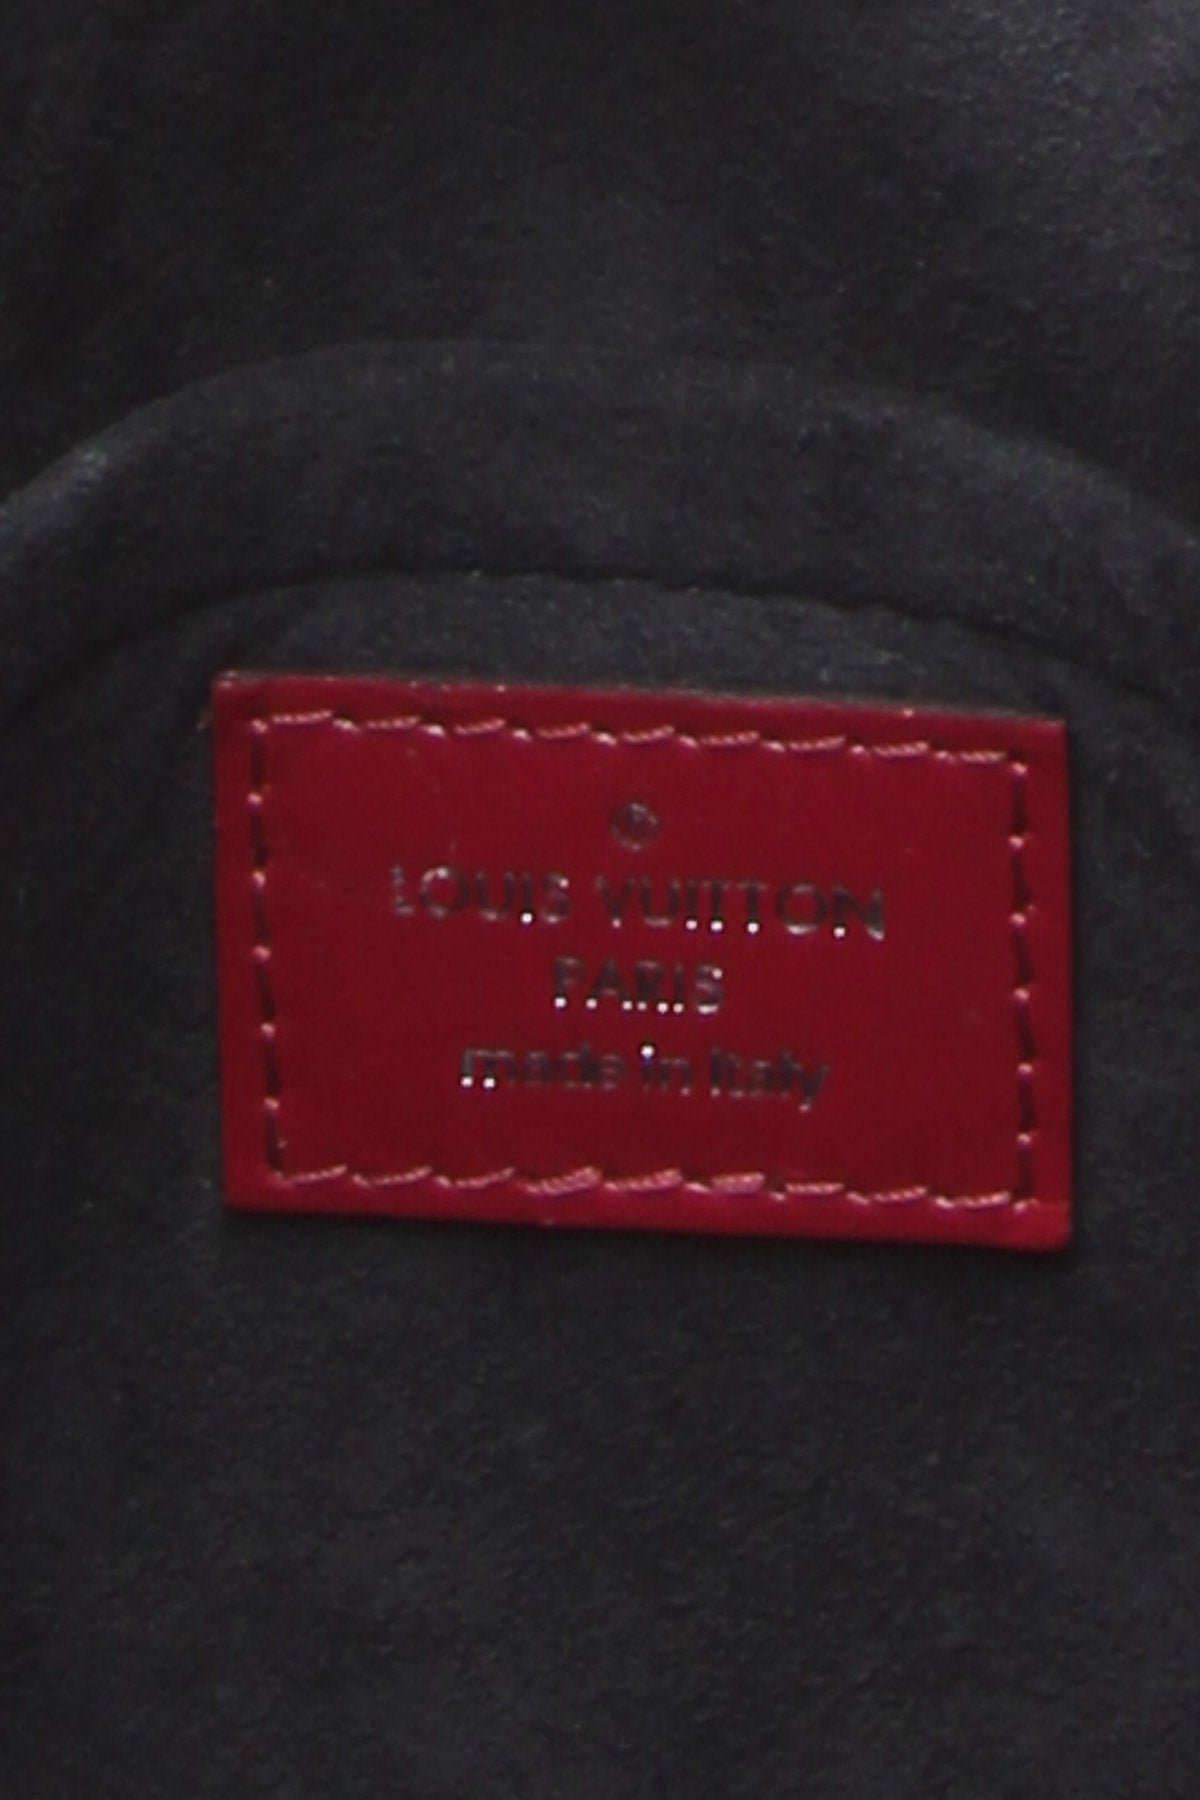 The Ultimate Guide to Louis Vuitton Leather and Canvas - Couture USA